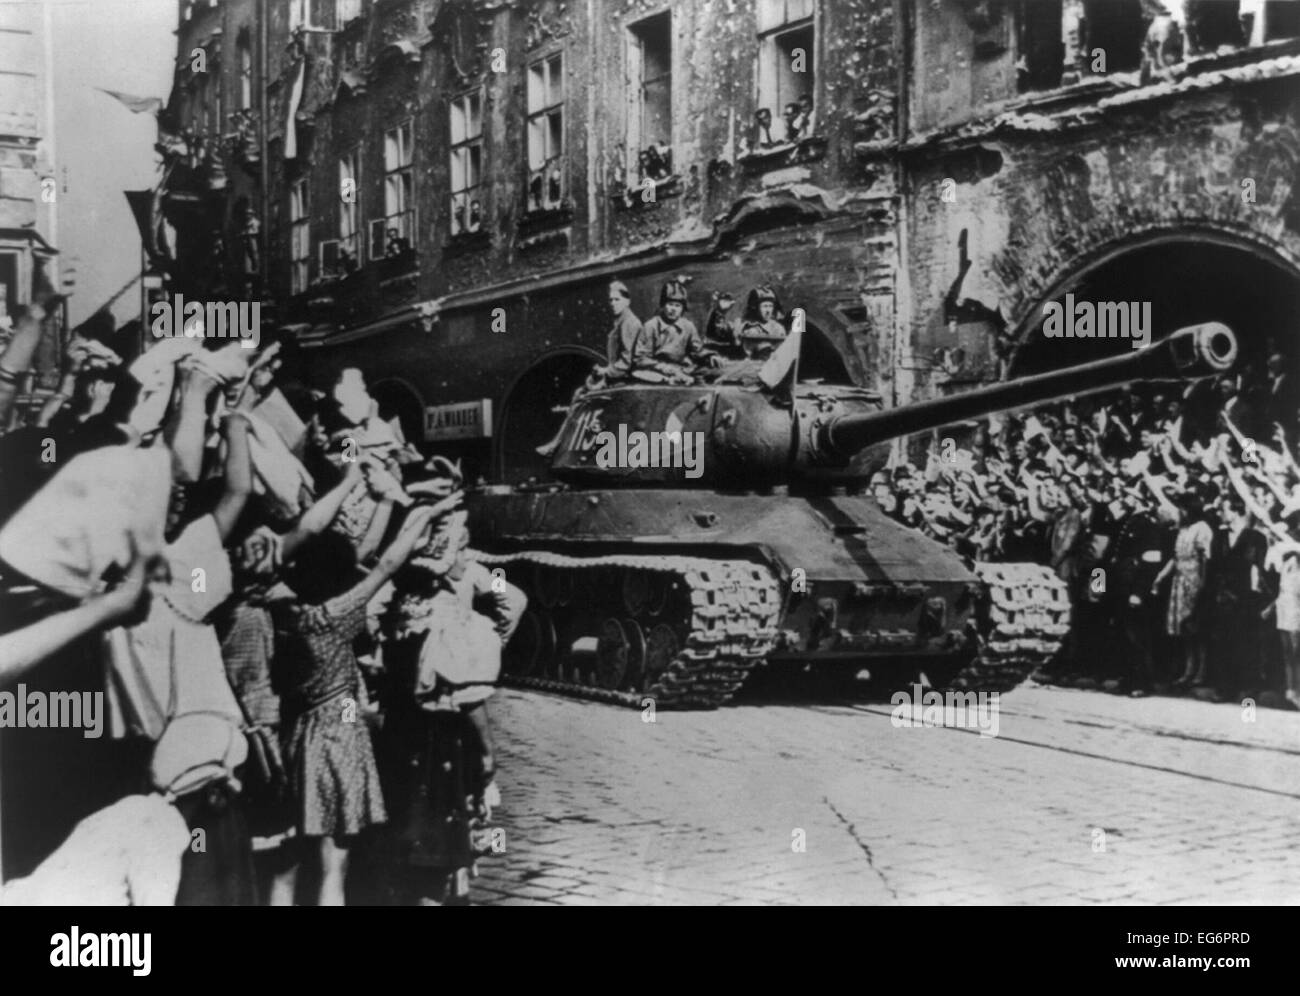 Crowd cheering arrival of liberating Soviet troops in a tank, Prague, Czechoslovakia. May 9, 1945. - (BSLOC 2014 15 247) Stock Photo